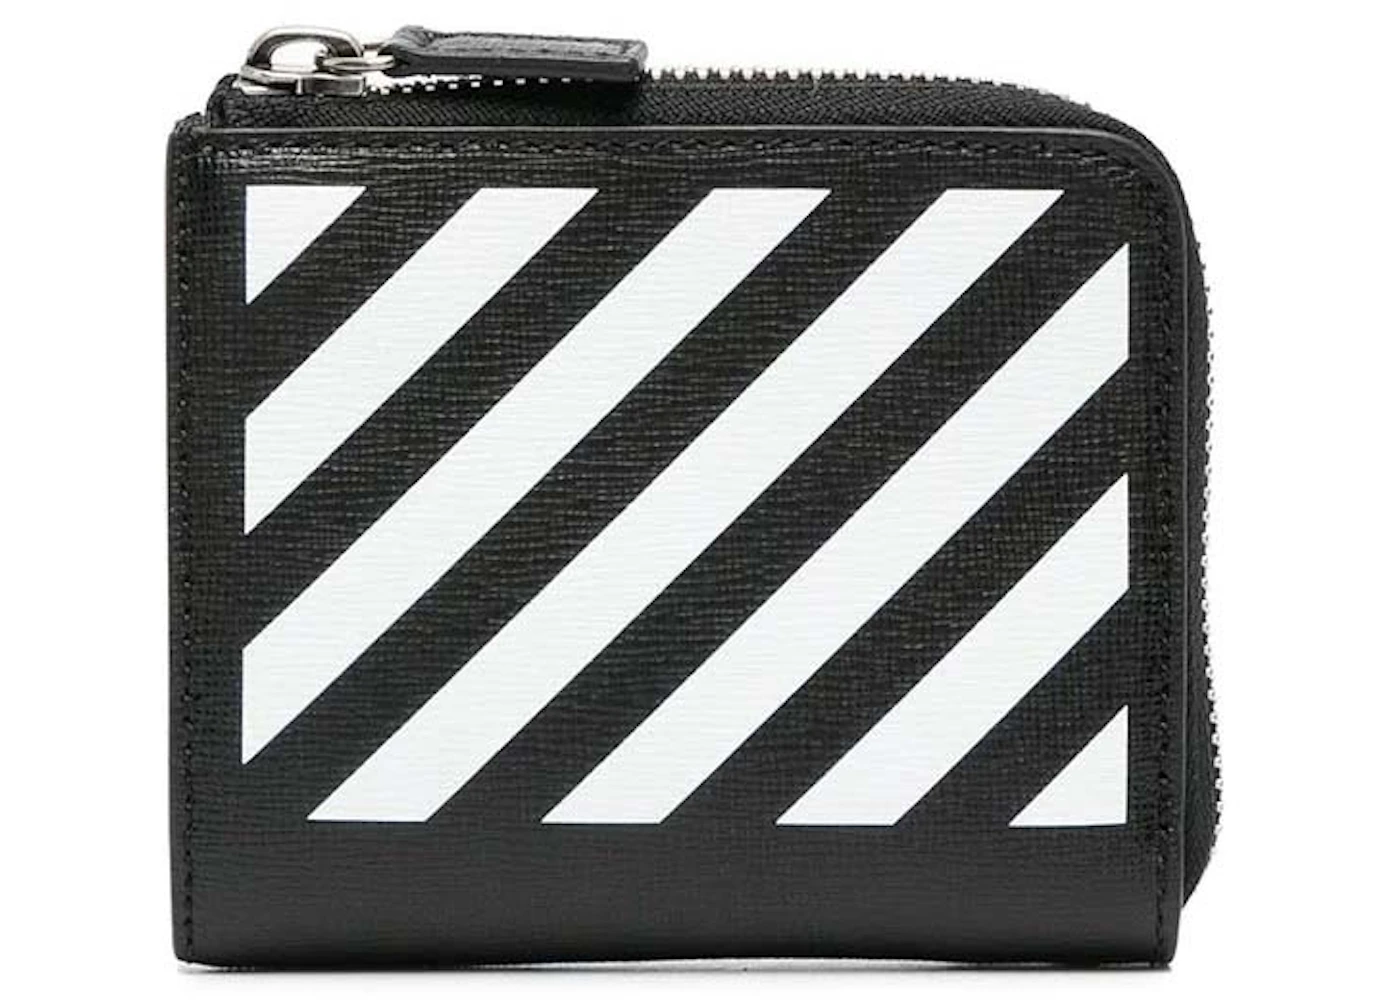 Off-White Diag Print (4 Card Slot) Zip Wallet Black/White in Leather ...